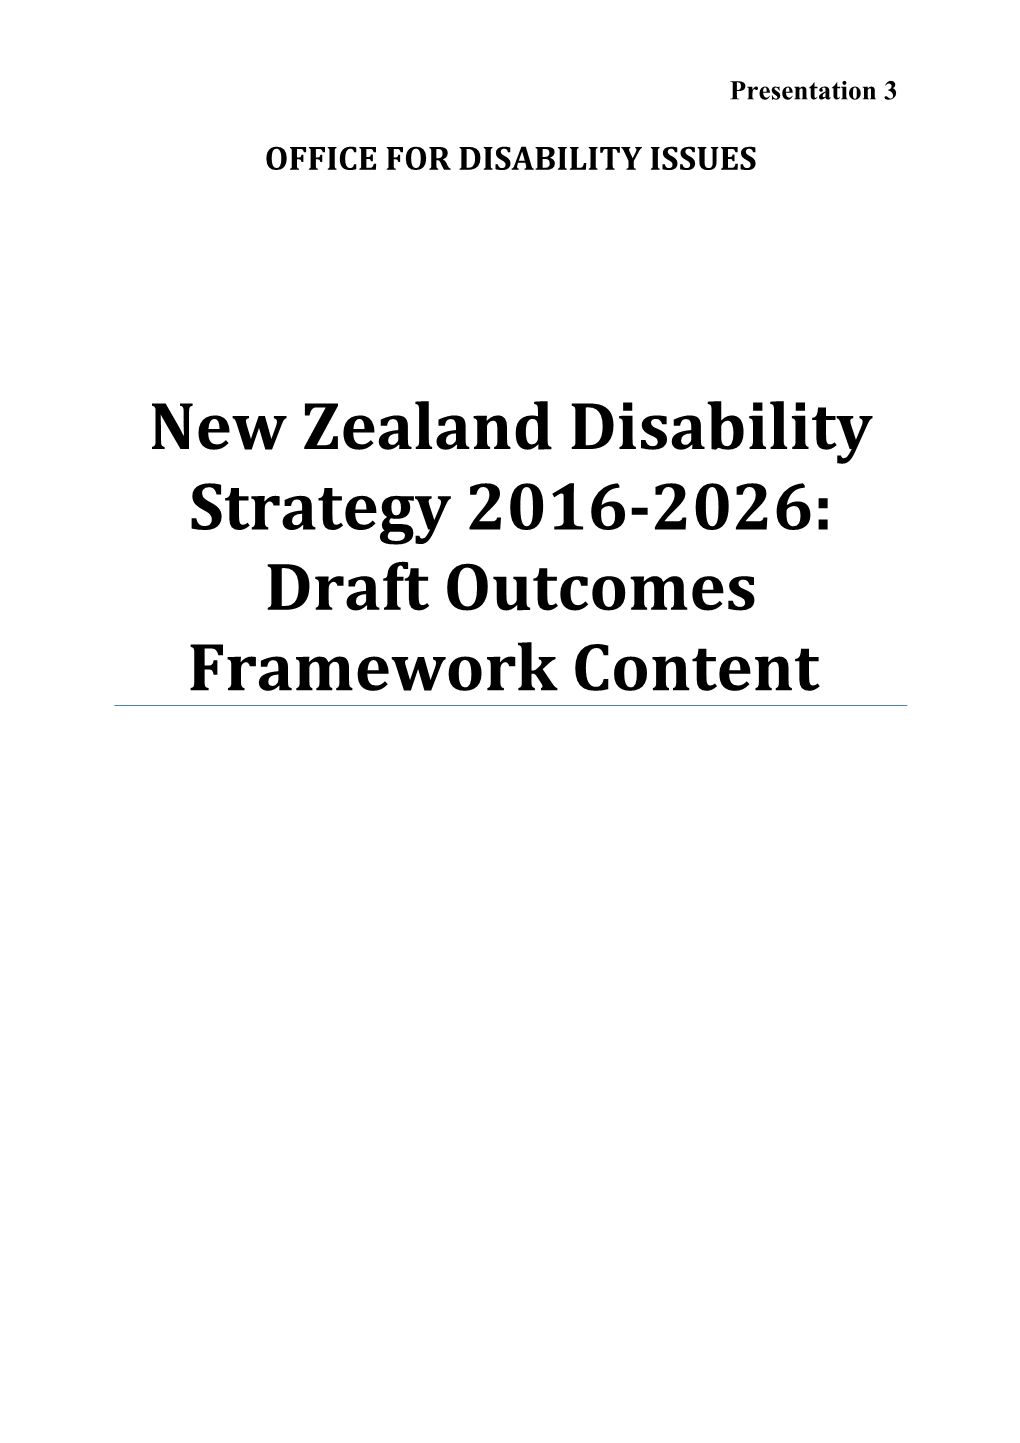 New Zealand Disability Strategy 2016-2026: Outcomes Framework Data Dictionary